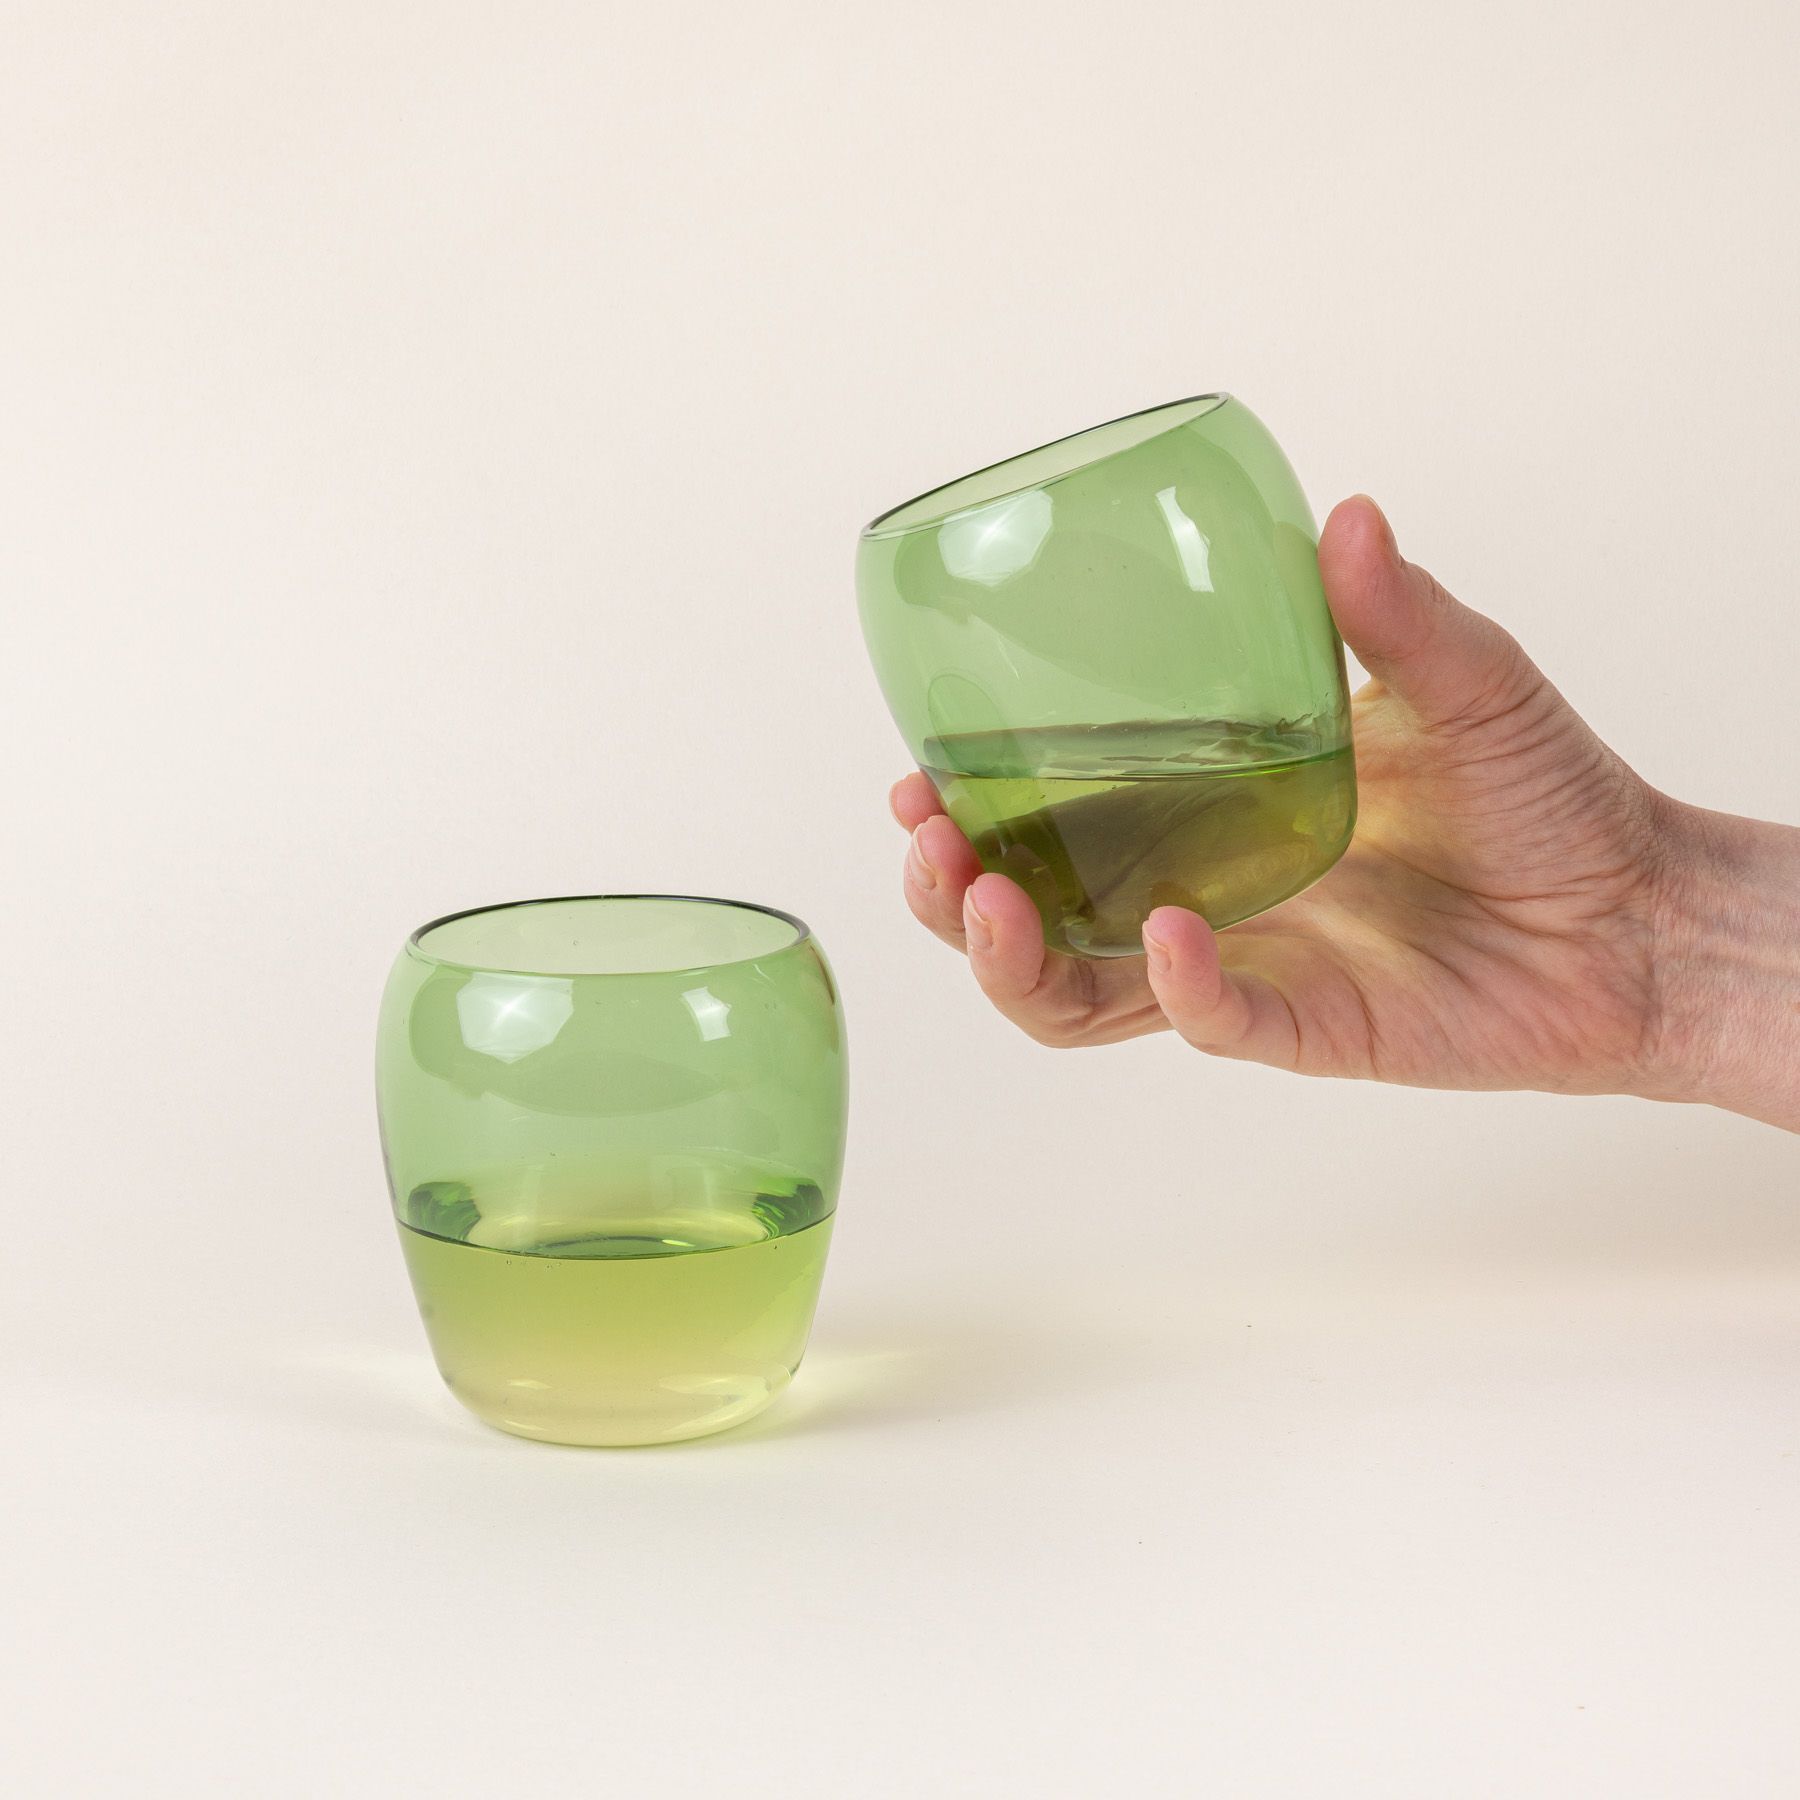 Two short light green glass tumblers with a slight curve inward on the top. A hand is holding the glass on the right.